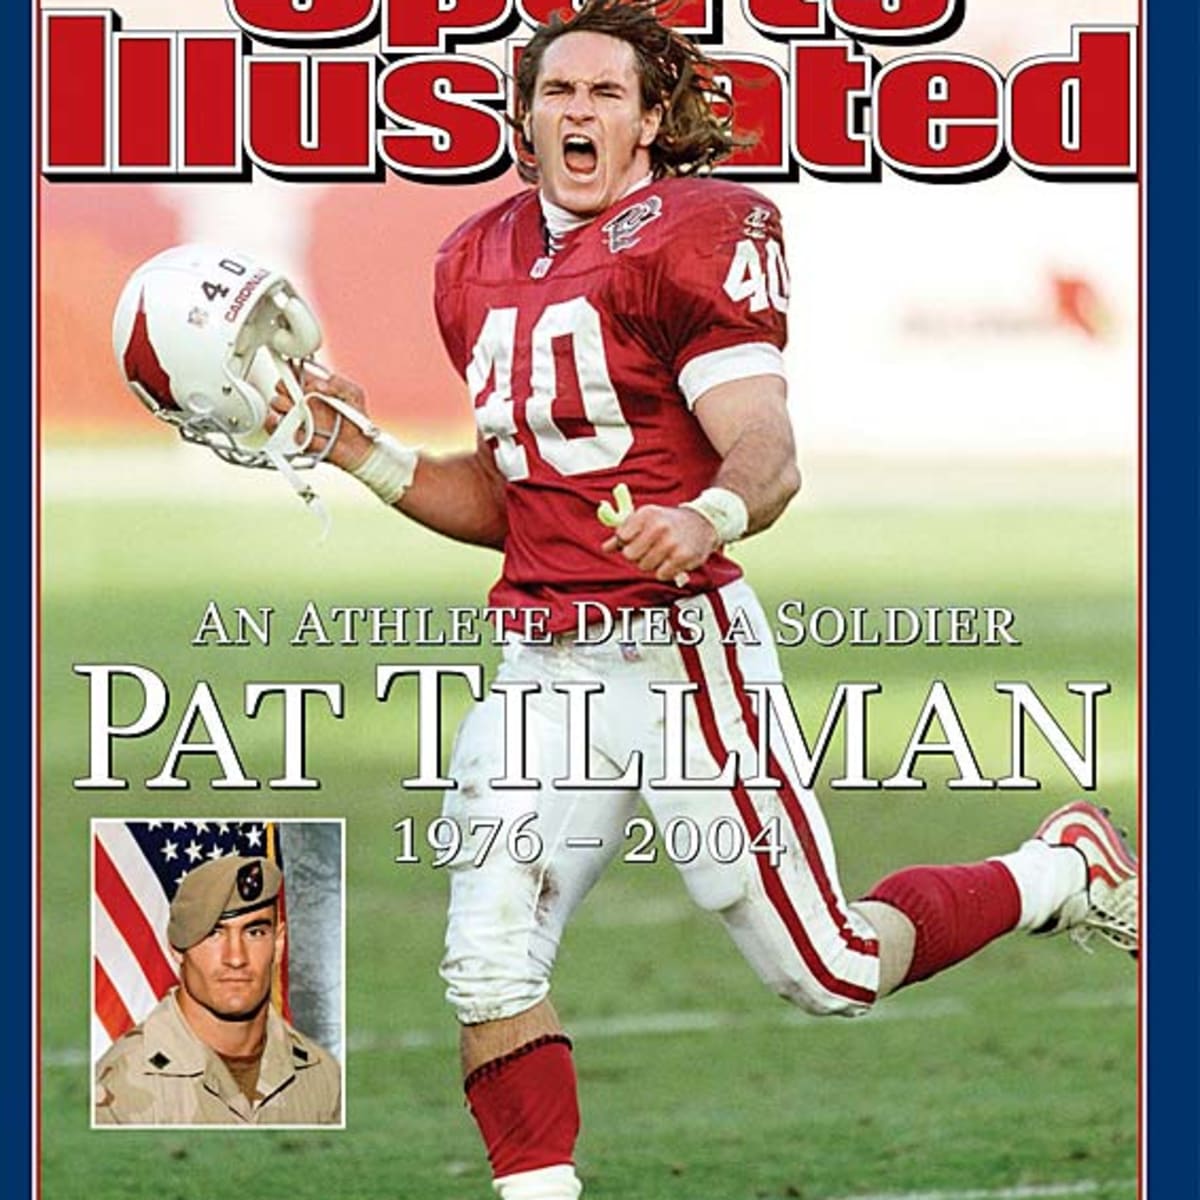 What the NFL's heroic caricature of Pat Tillman tells us about patriotism -  The Washington Post